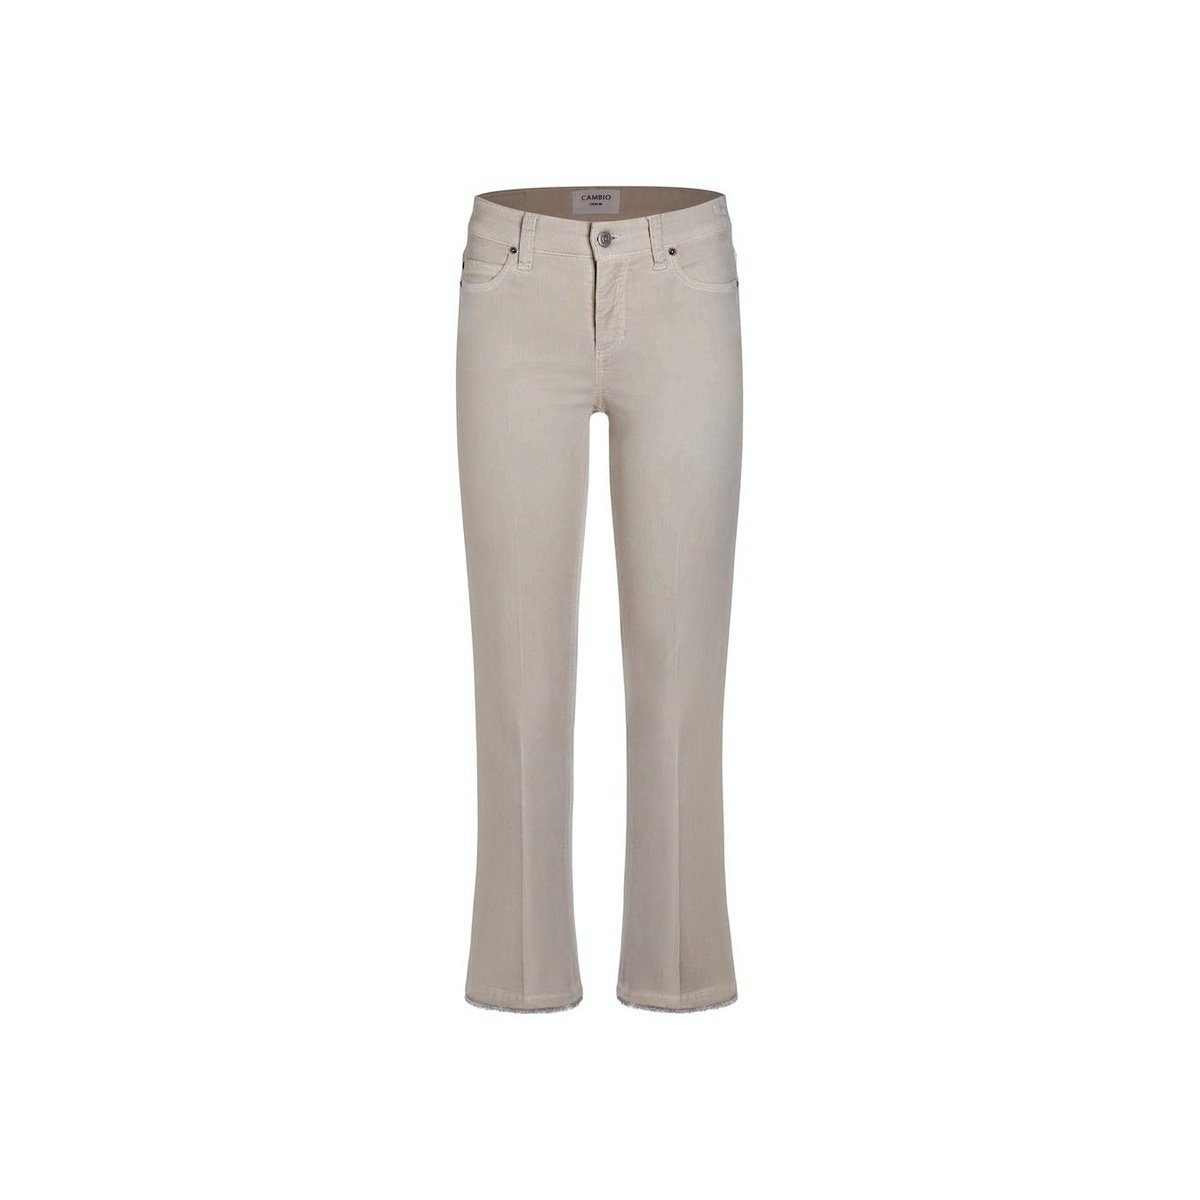 Cambio 5-Pocket-Jeans 067 simply uni taupe (1-tlg)